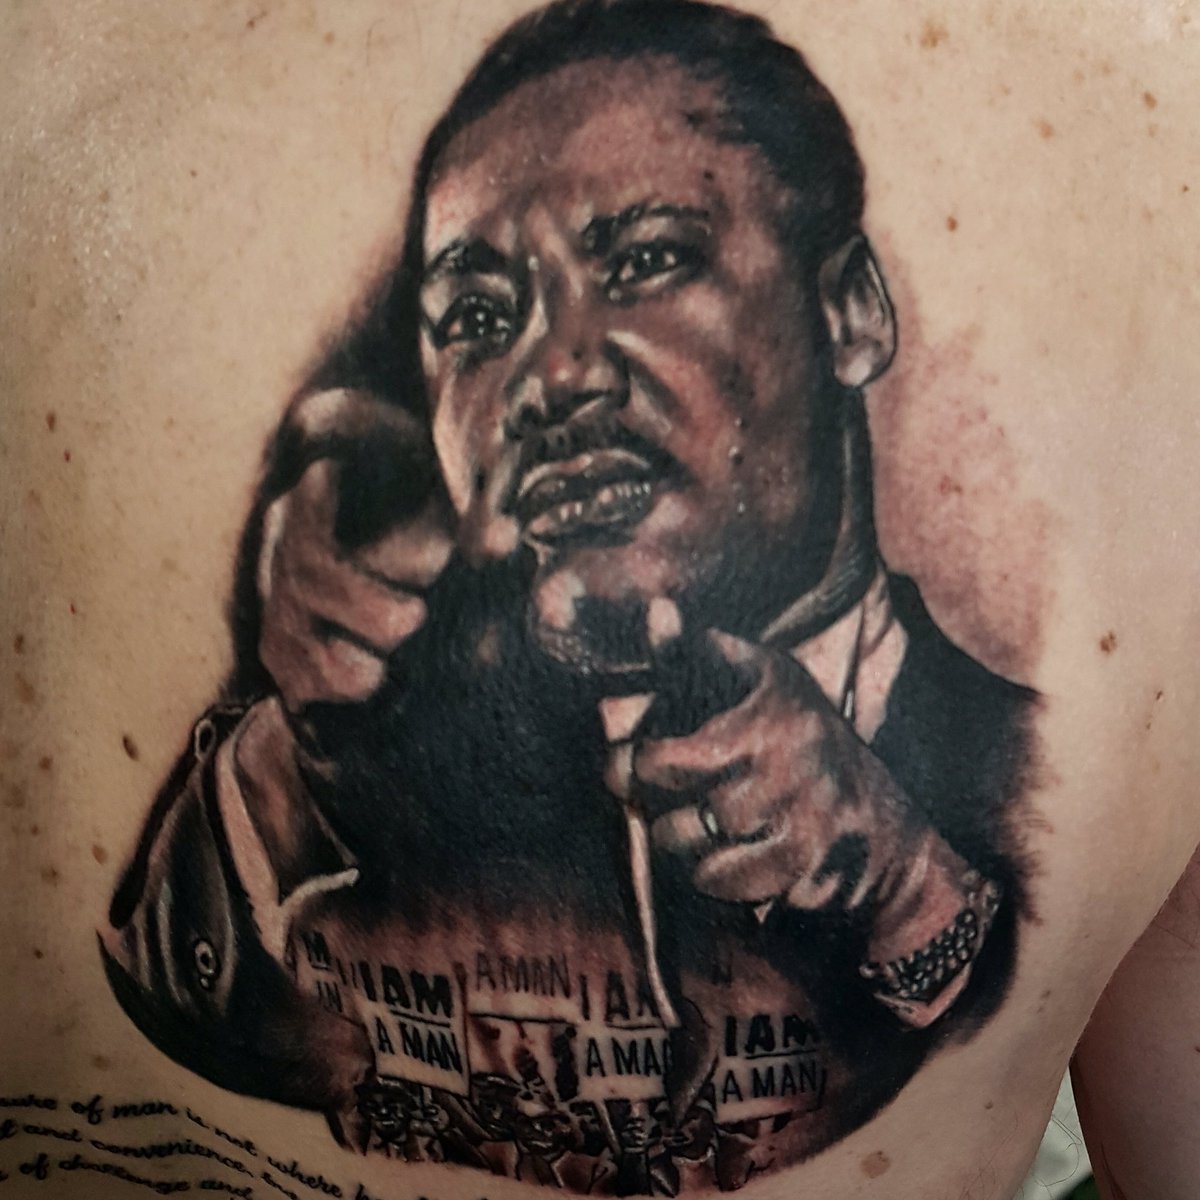 Ink Of Hearts Tattoos on Twitter I have a dream  Tattoo by SimonSaysInk  MLK MartinLutherKing MartinLutherKingJR TheKing Unity IOH  InkofHearts Tattoos httpstcohVD8SwkZqX  Twitter